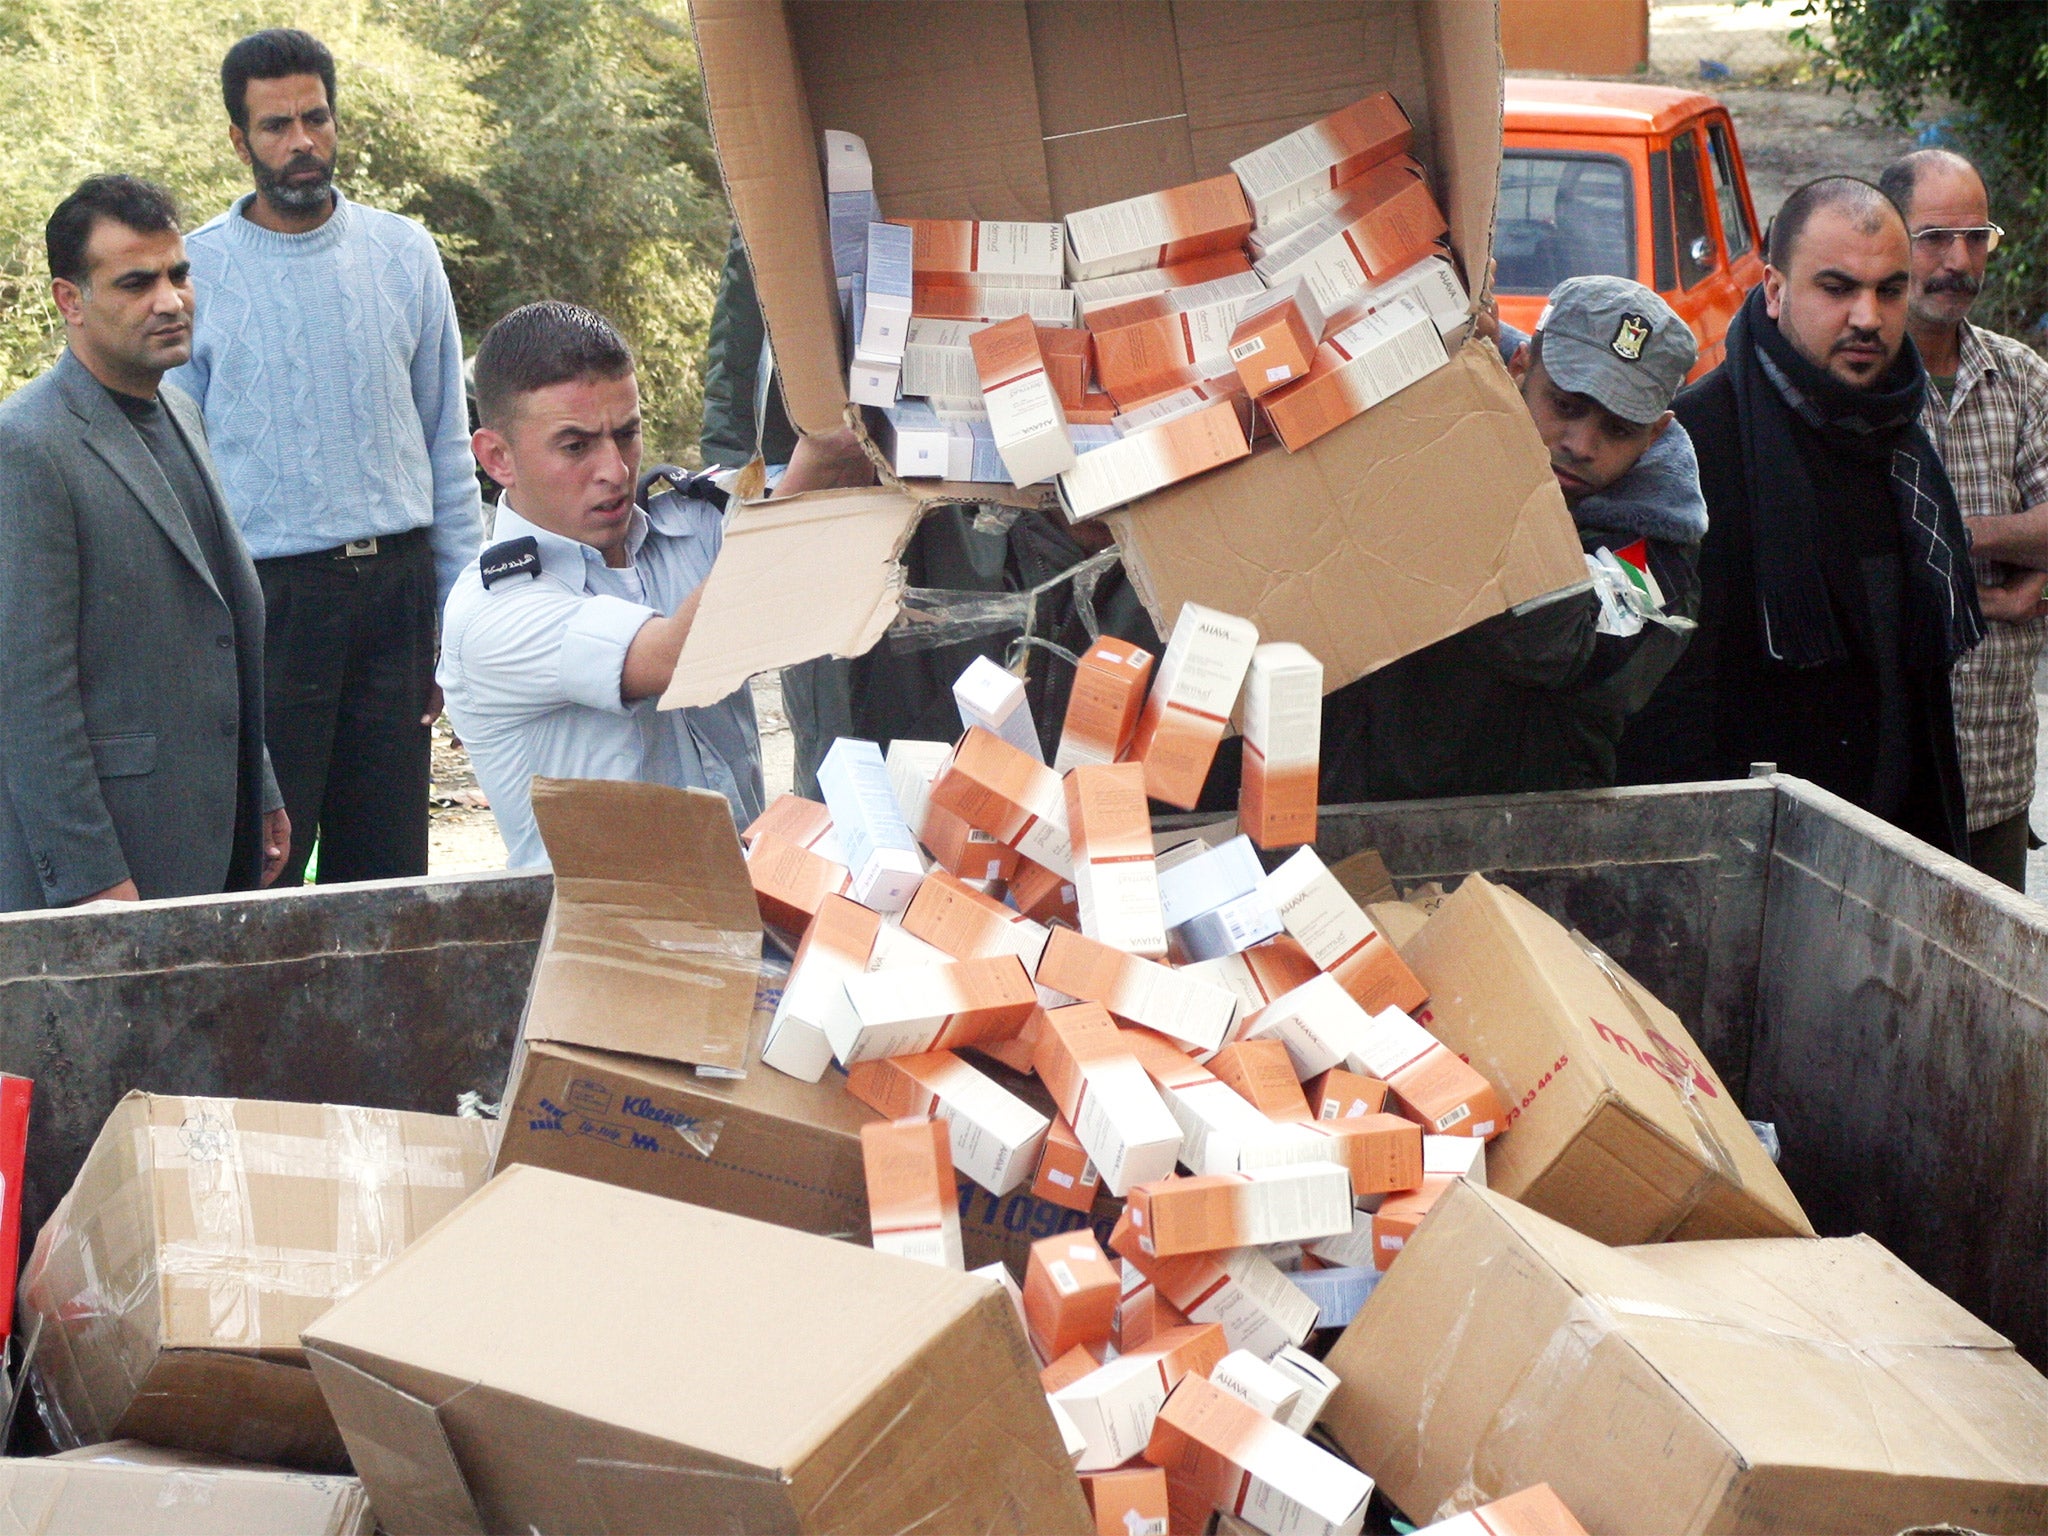 Palestinian customs officials dump Ahava products seized from West Bank shops during a 2009 boycott